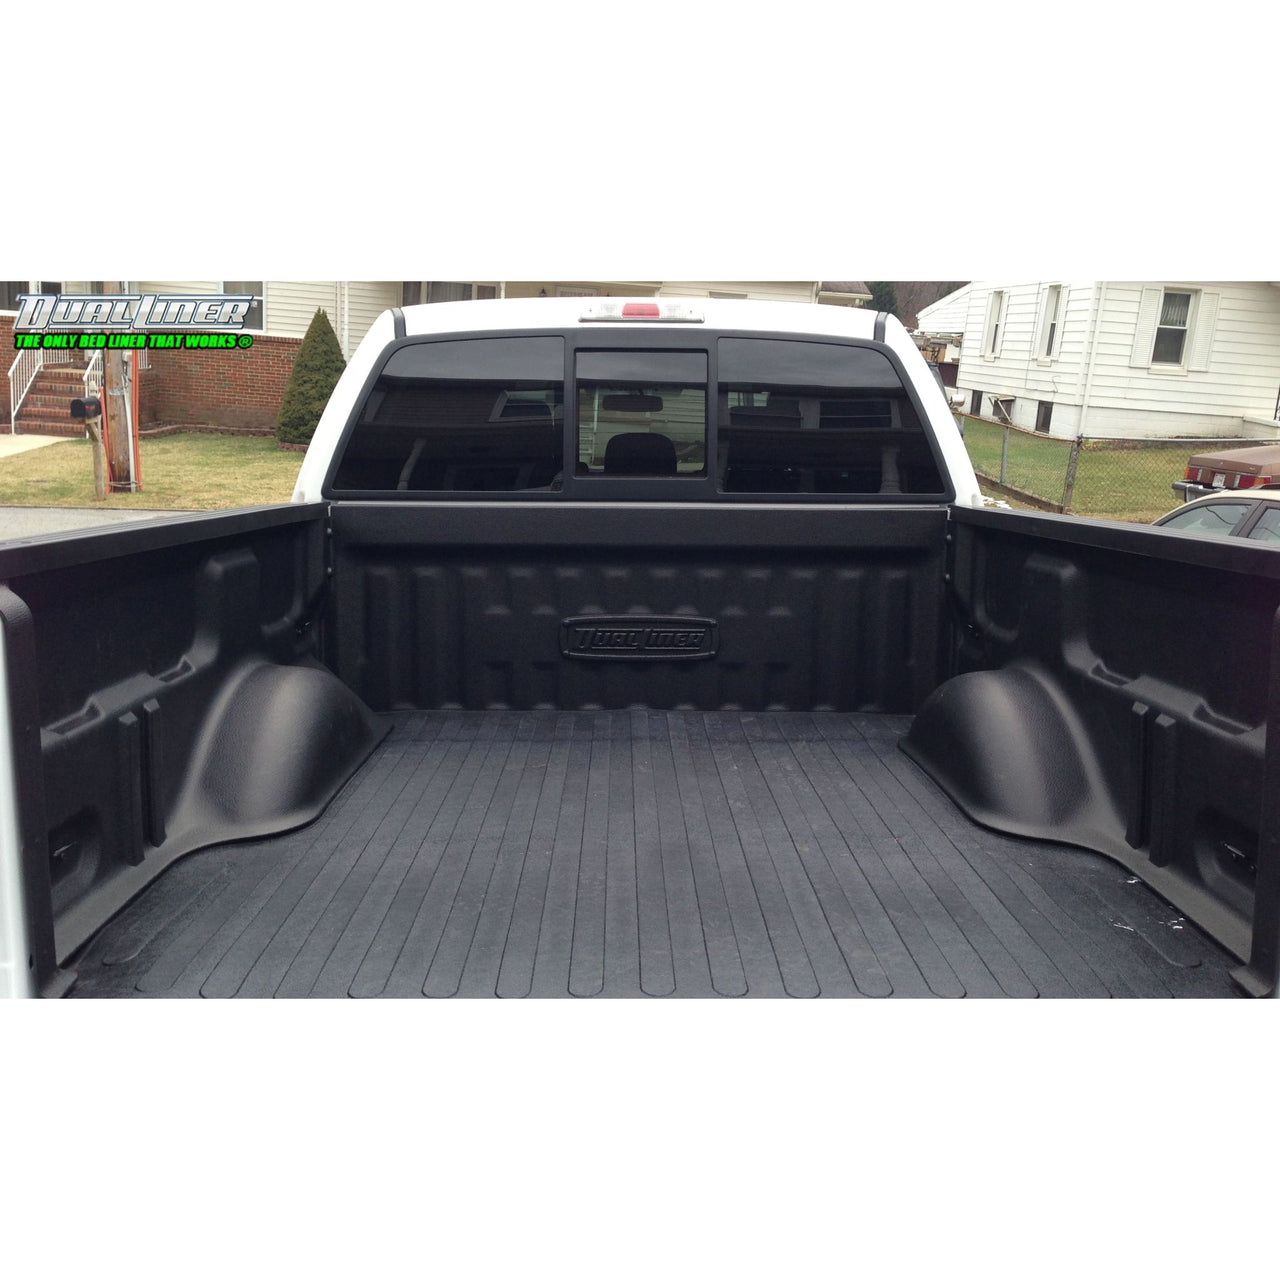 DualLiner 2021 to 2022 F-150 (WITH LED Light, WITH Power Pack & Tailgate Work Surface) - Short 5.5' Bed